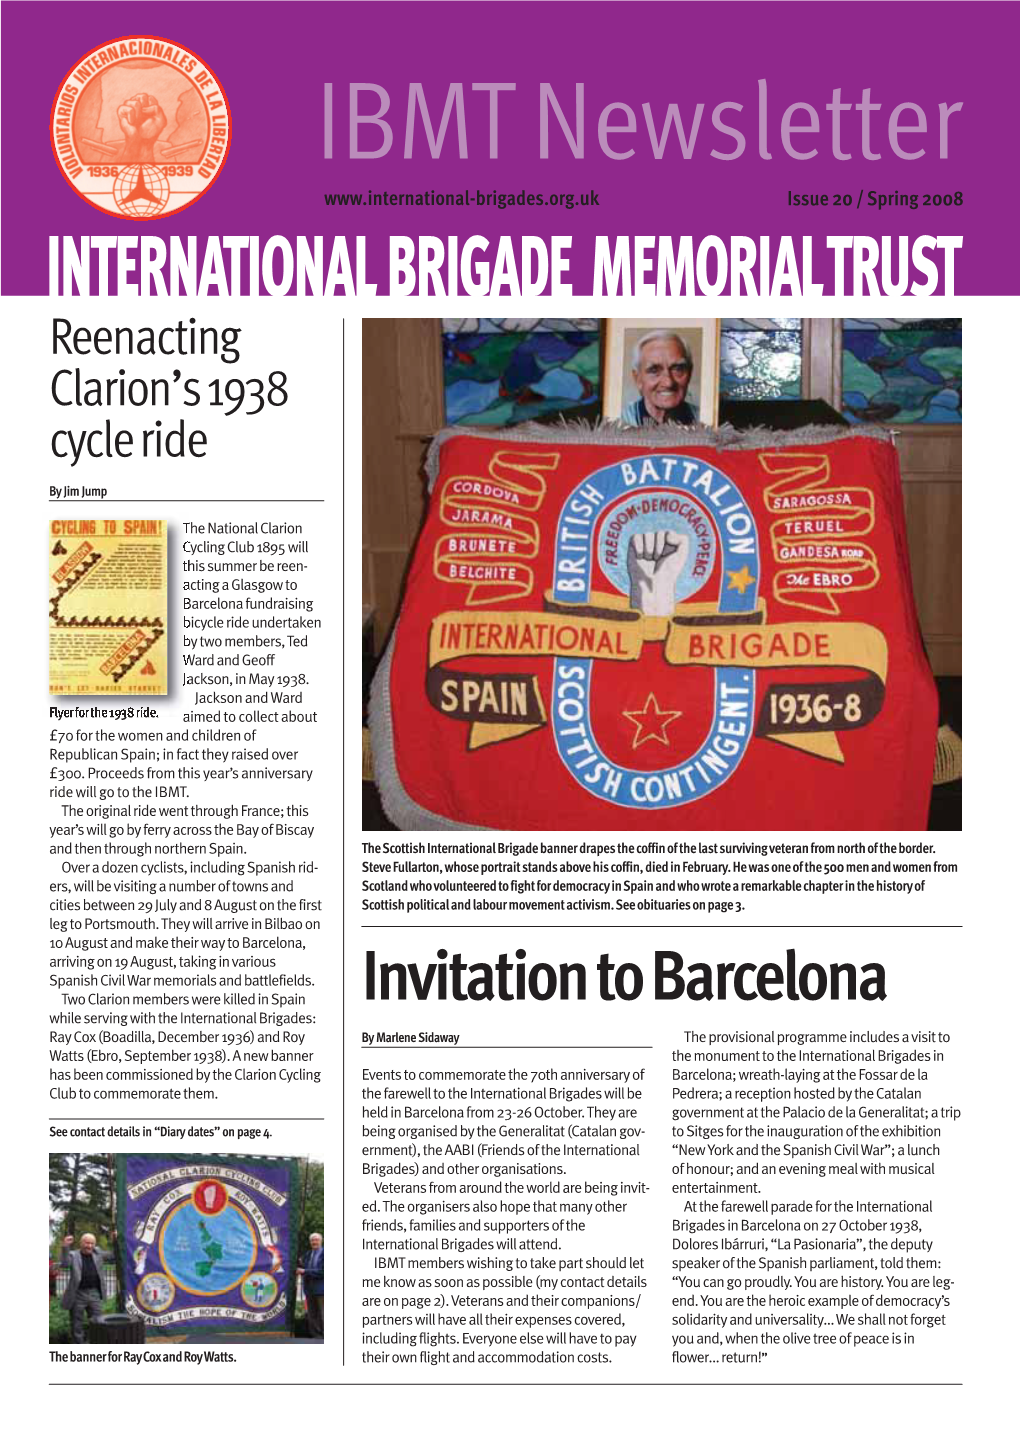 IBMT Newsletter Issue 20 / Spring 2008 INTERNATIONAL BRIGADE MEMORIAL TRUST Reenacting Clarion’S 1938 Cycle Ride